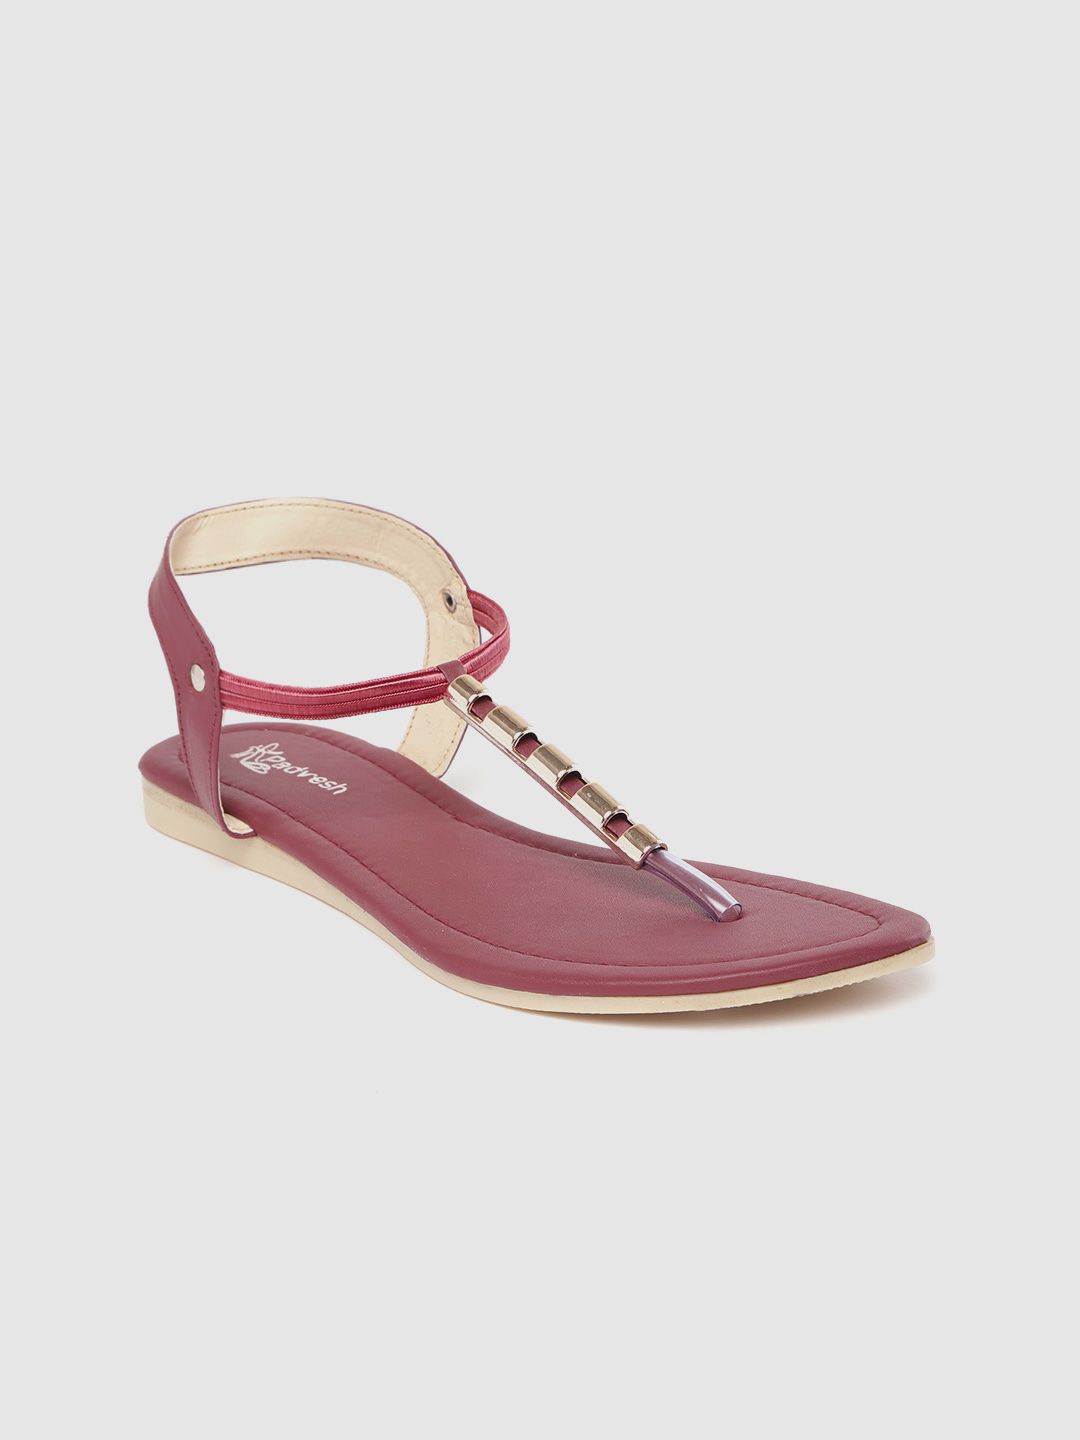 Padvesh Women Gold-Toned & Burgundy Embellished T-Strap Flats Price in India